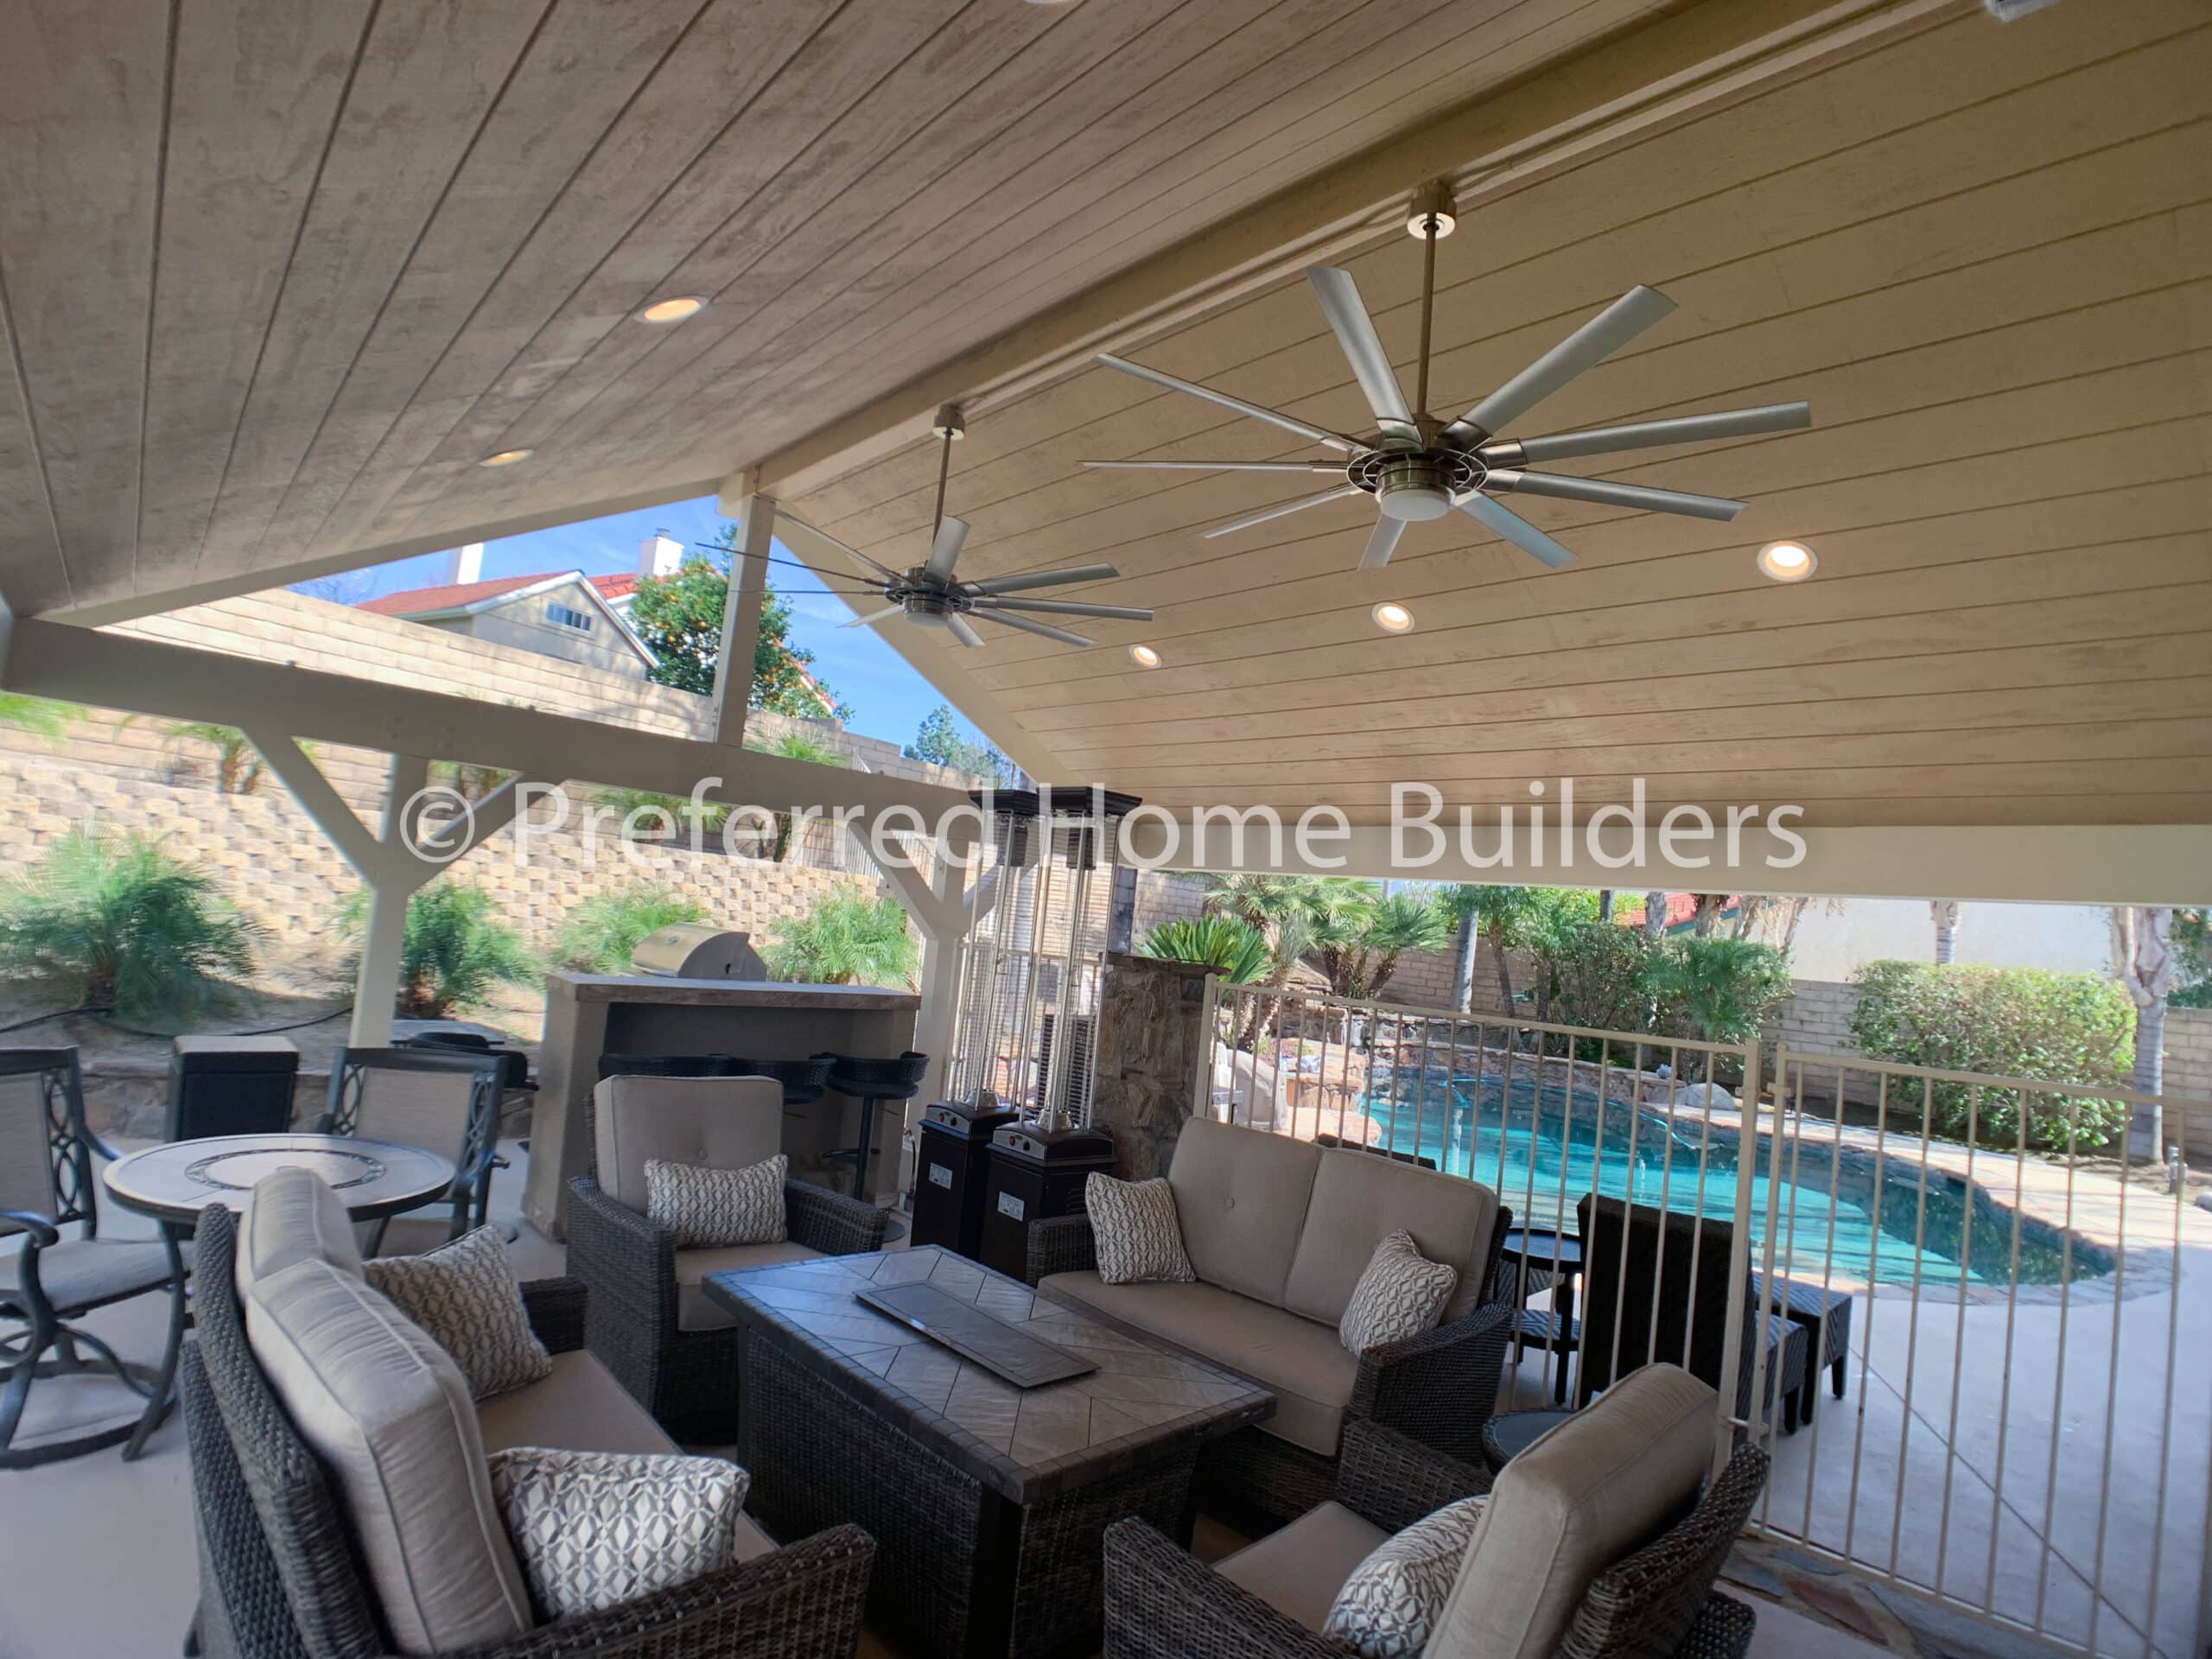 Covered Patio and Outdoor Kitchen Simi Valley 23 scaled 1